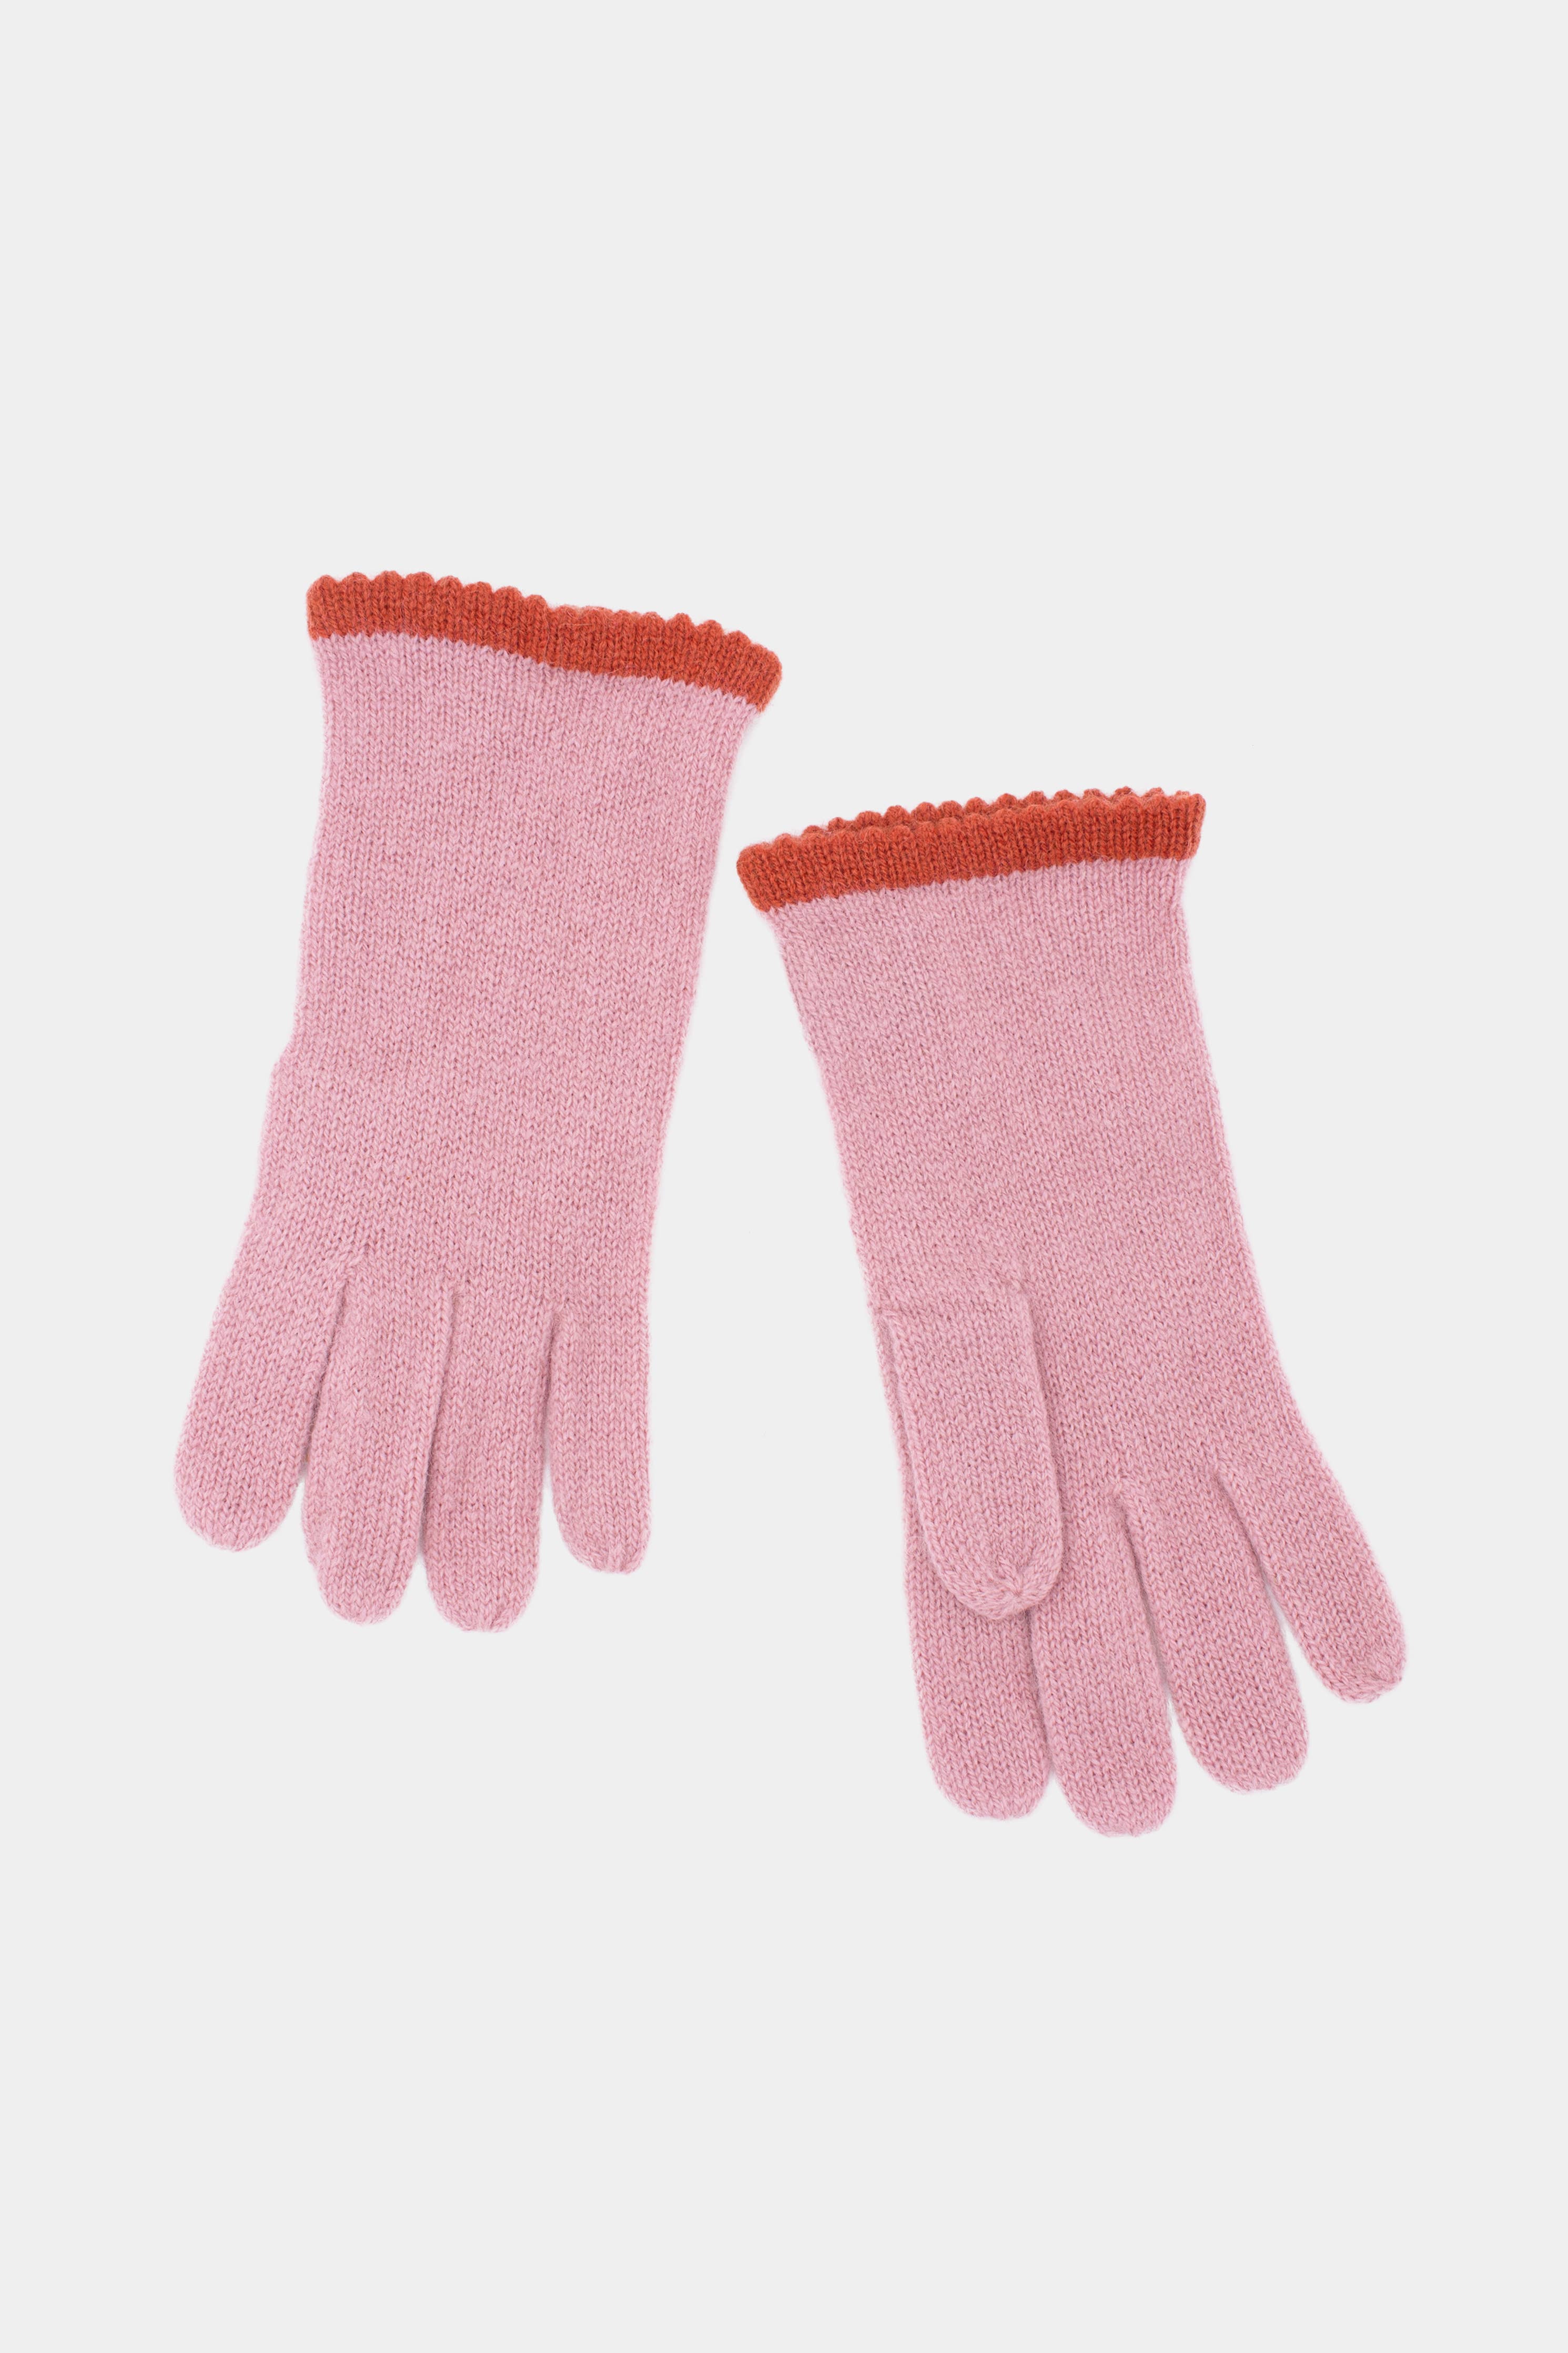 Alpaca Gloves - Dusty Pink and Aura Red - Out of the Blue